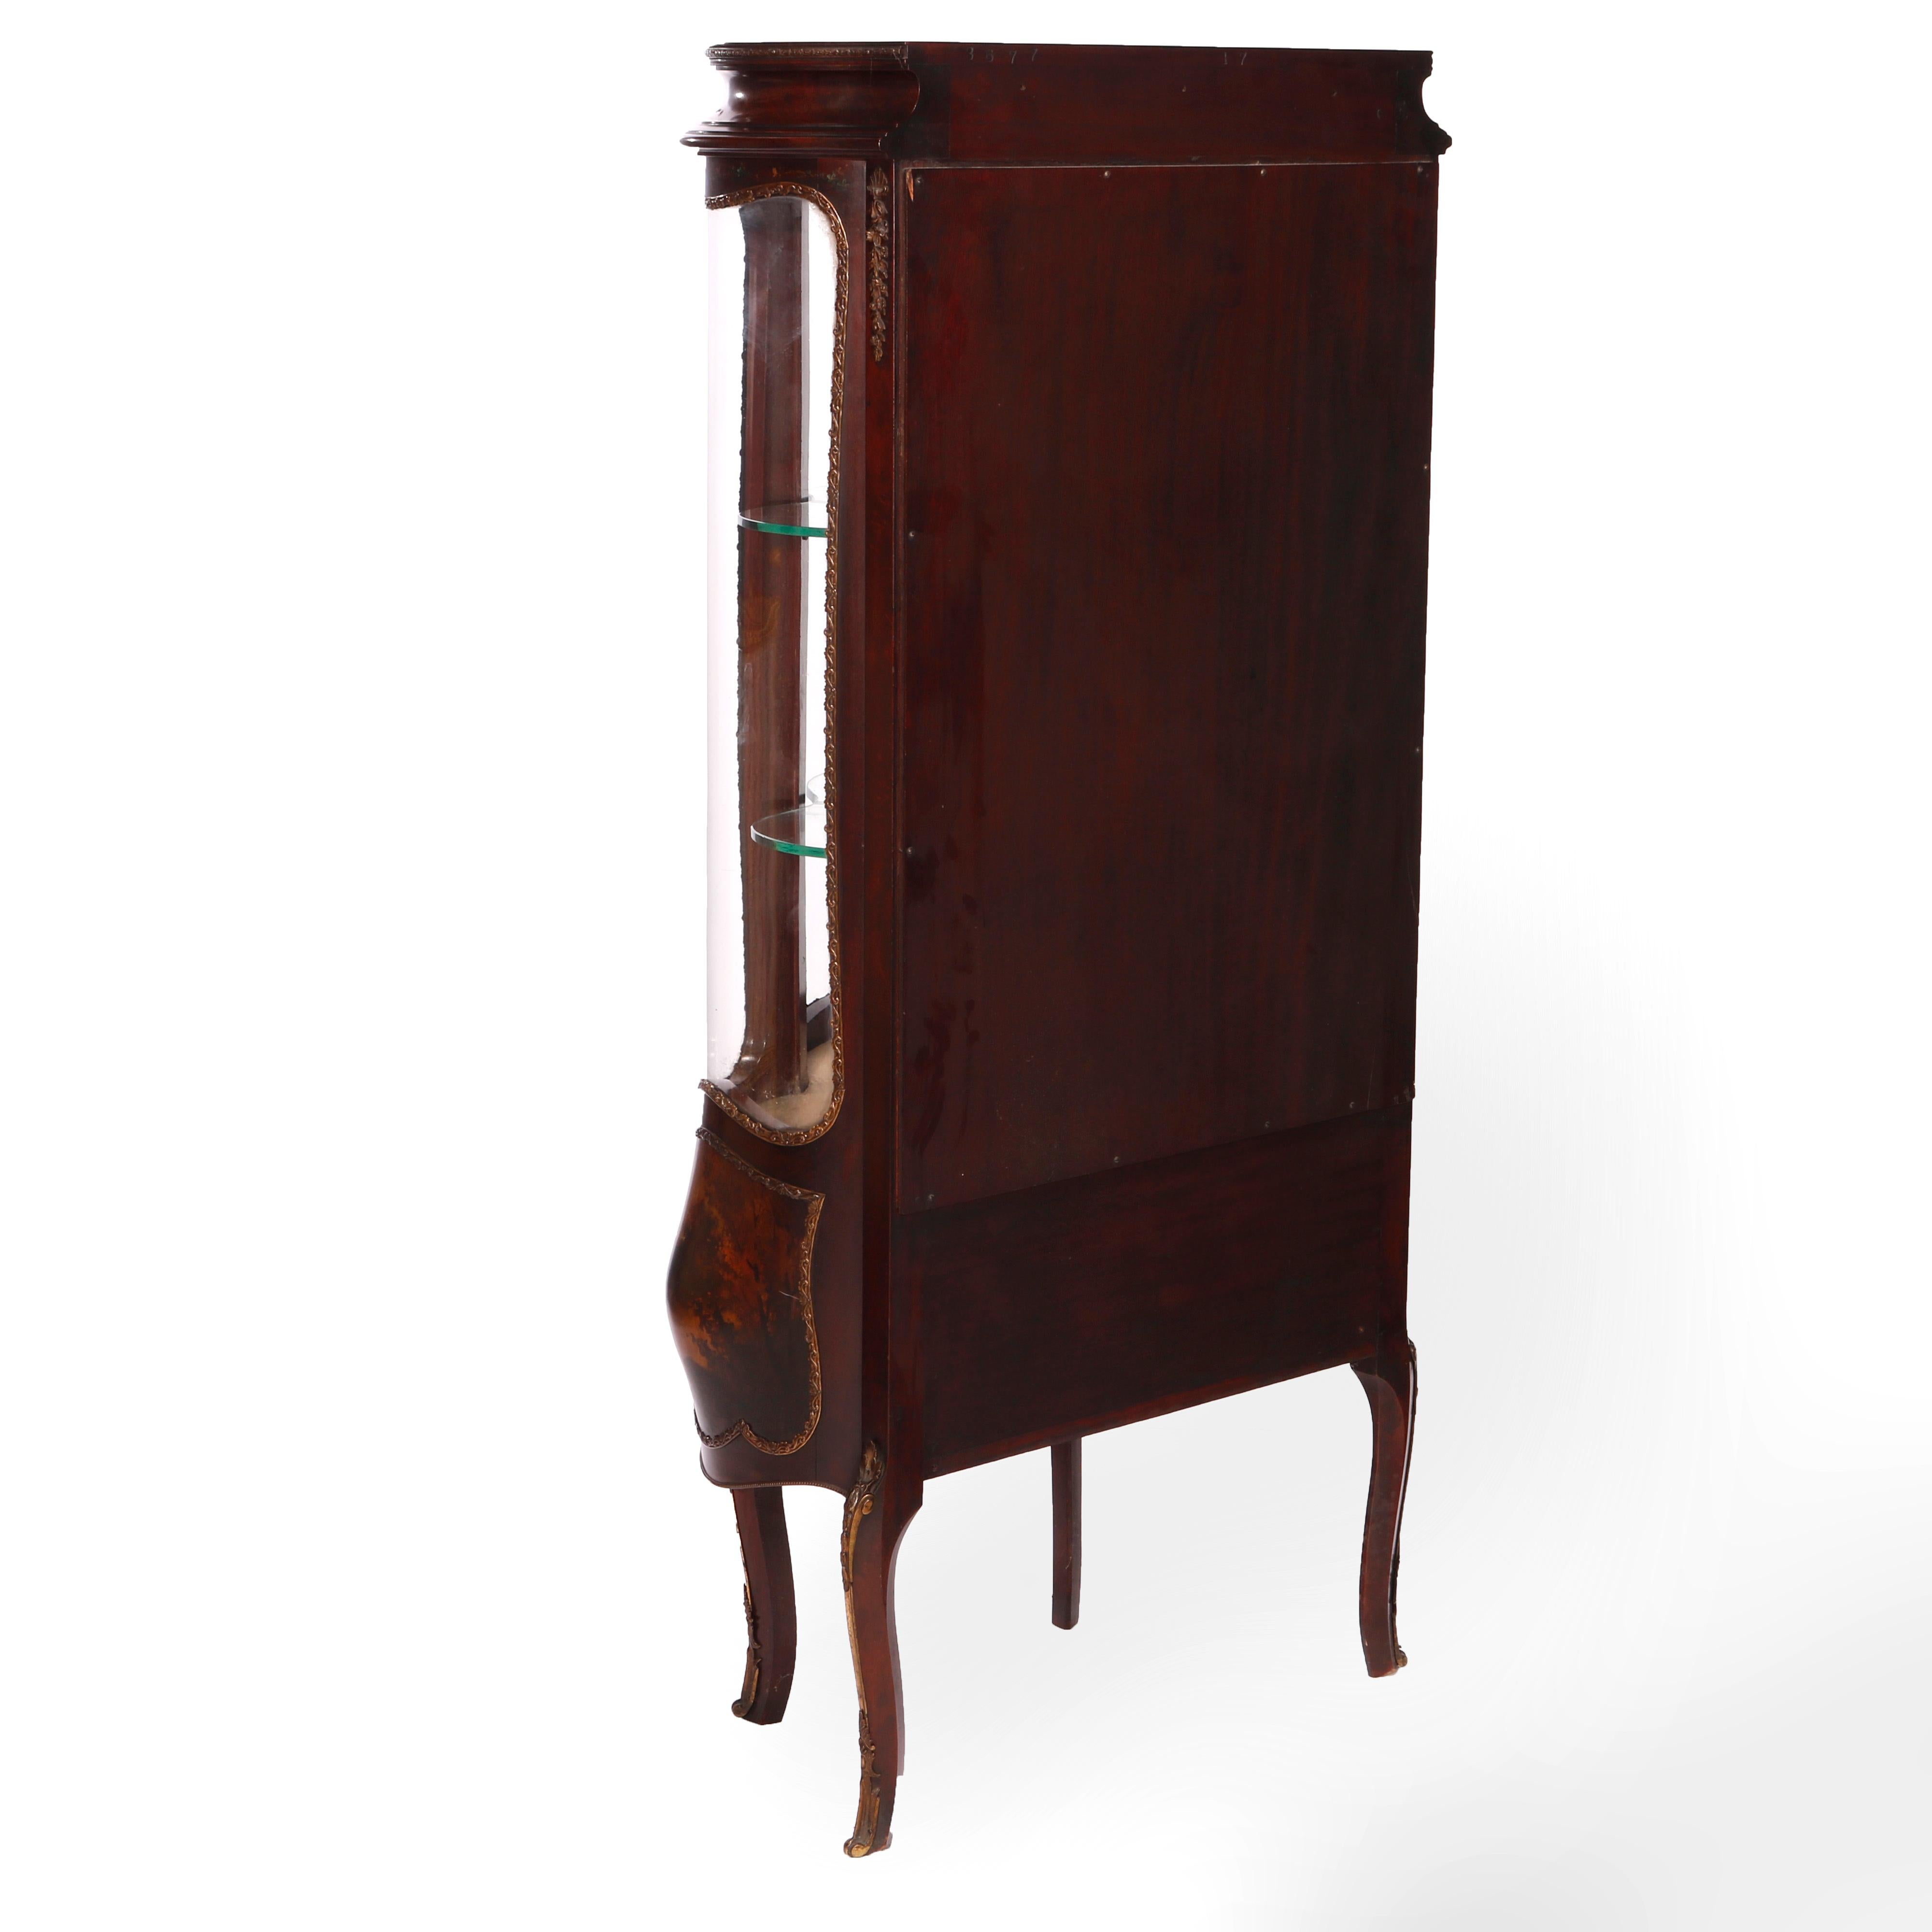 Painted Antique Verni Martin Decorated Mahogany & Ormolu Curved Glass Vitrine, 19th C For Sale